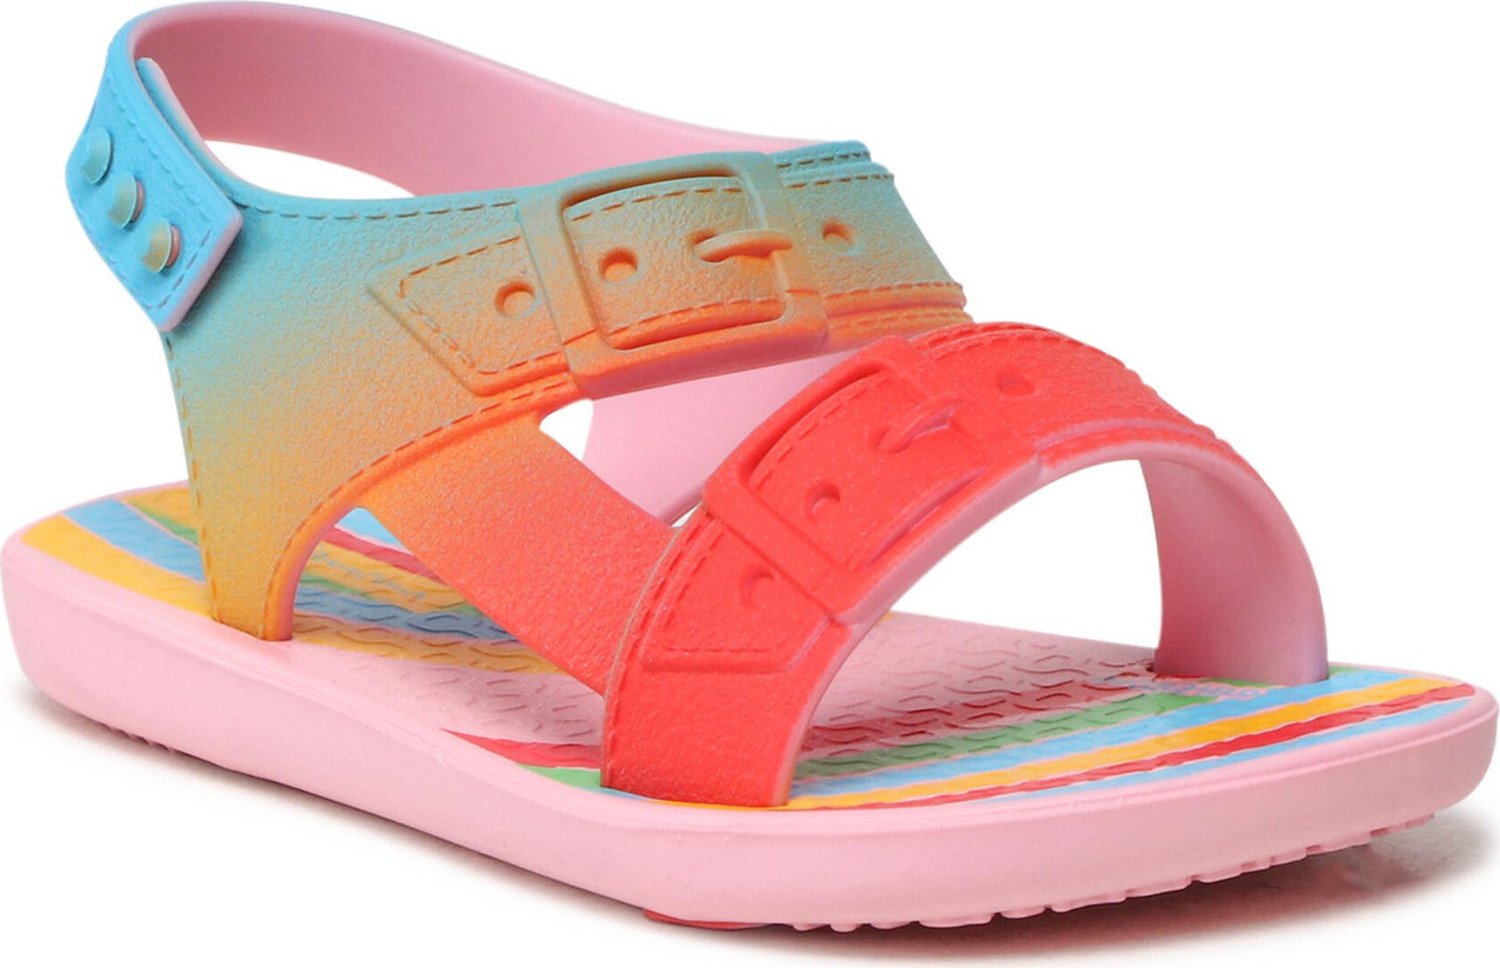 Sandály Ipanema Brincar Papete Baby 26763 Pink/Red/Yellow 25207